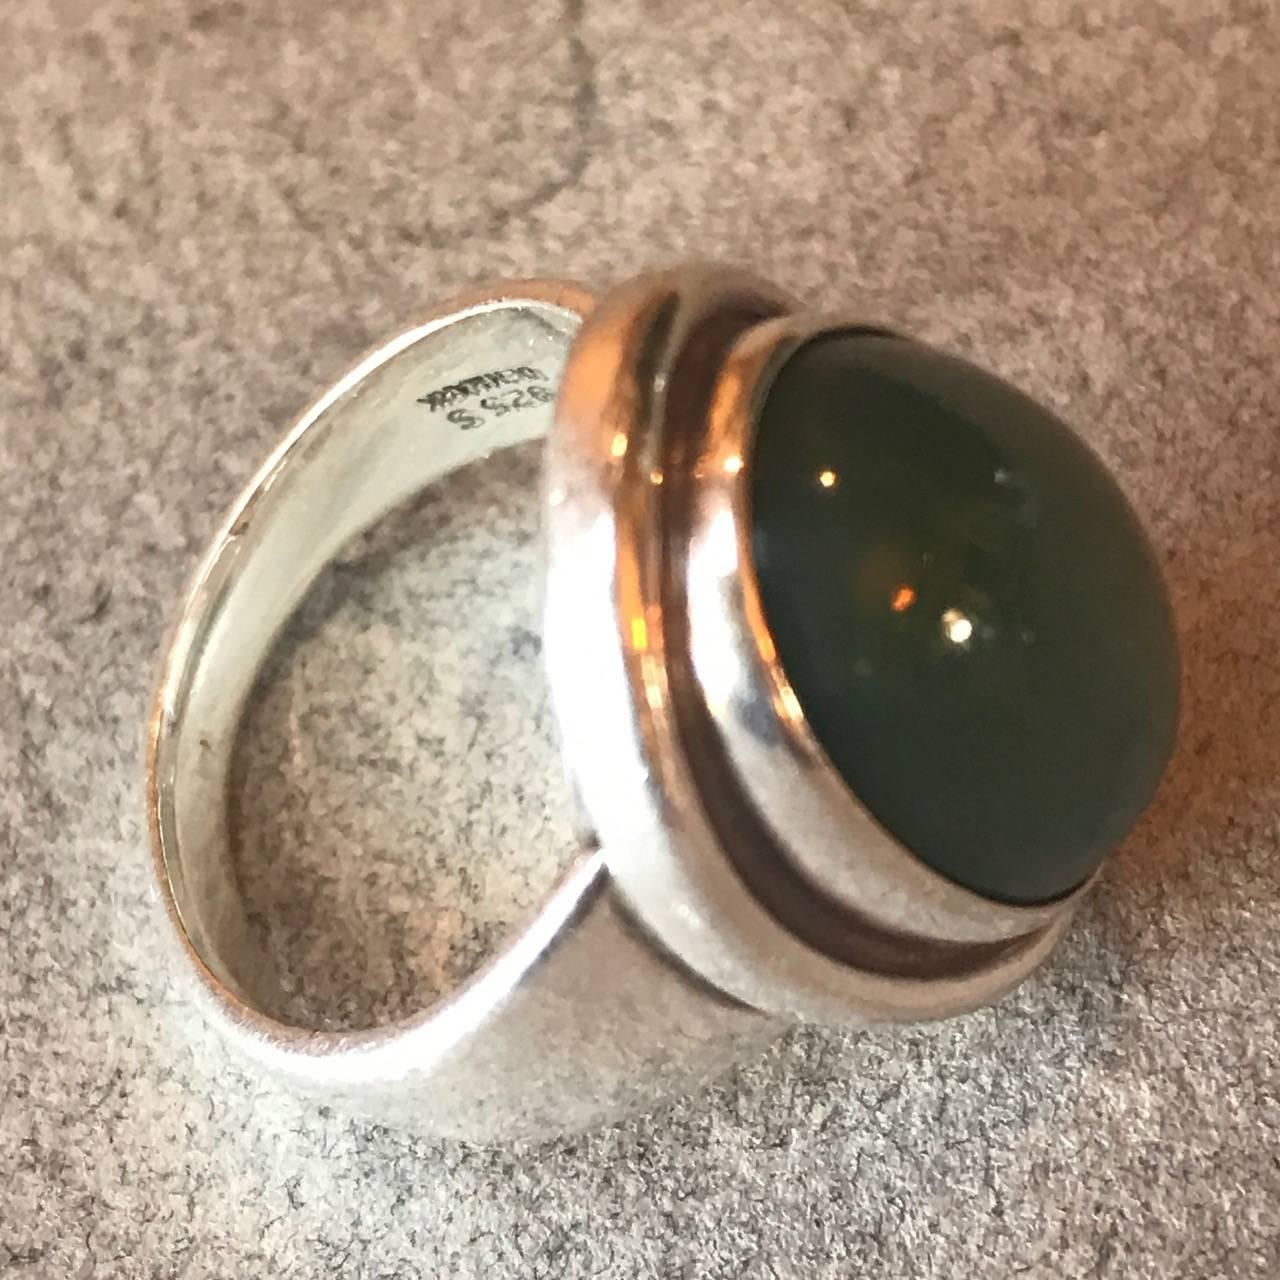 Georg Jensen Ring, no. 46A with Jadeite Cabochon Stone by Harald Nielsen

US ring size 7.

Can be resized. 

Complimentary gift box and FREE shipping included.

About the designer:
Harald Nielsen (1892-1977) is an important figure in the history of